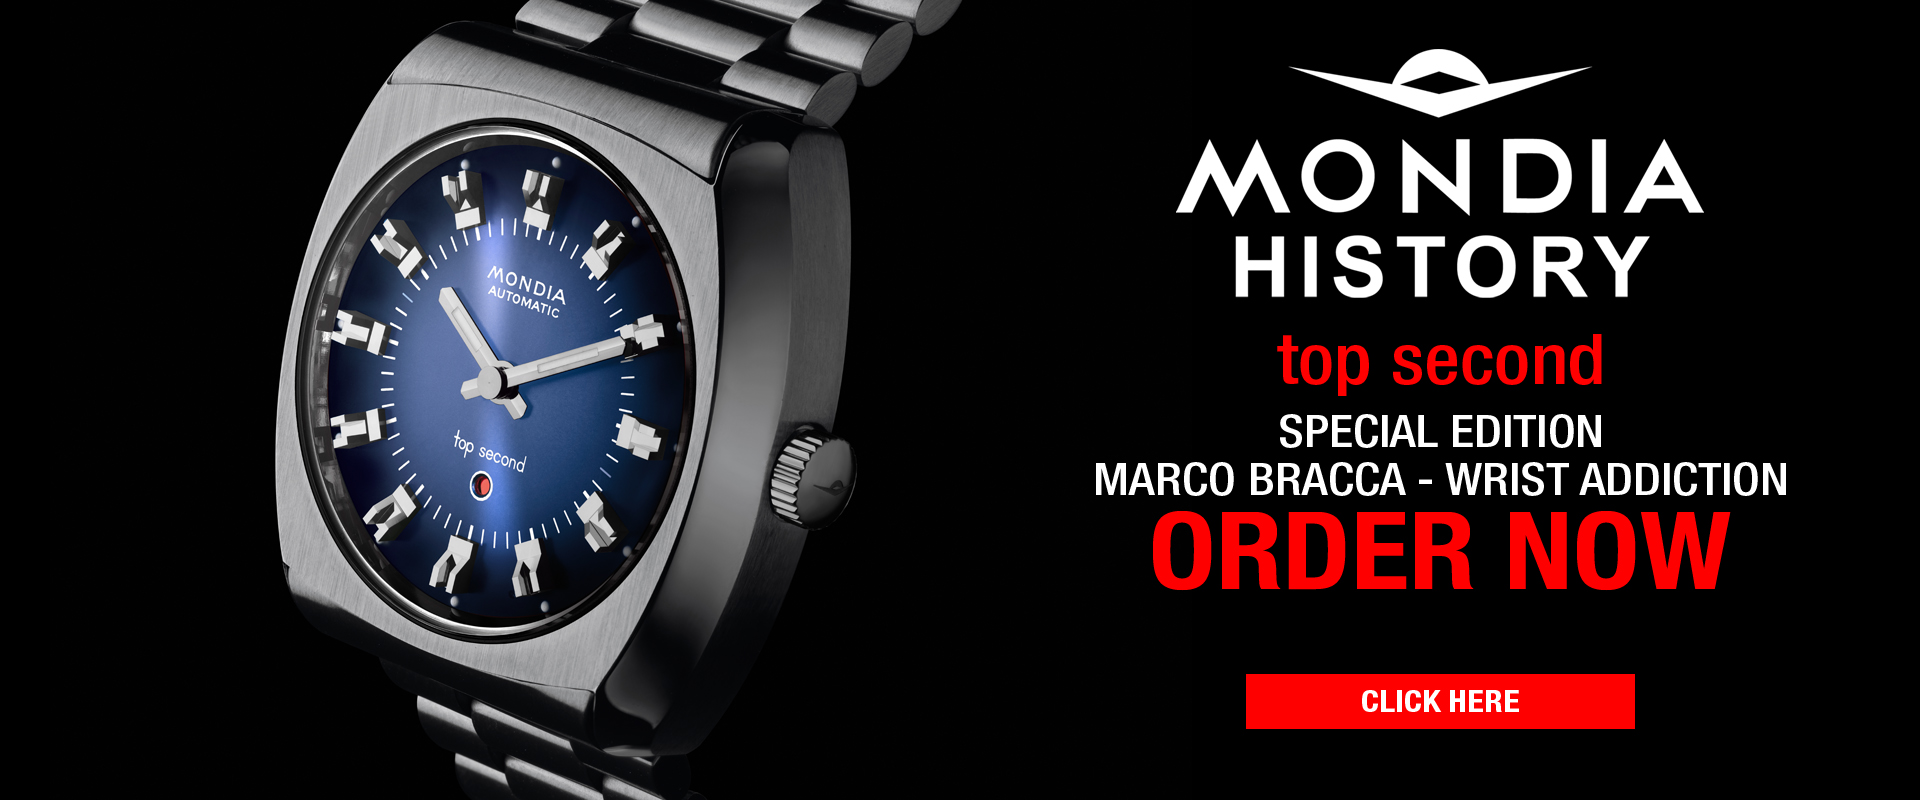 Mondia History - Top Second - Marco Bracca Special Edition